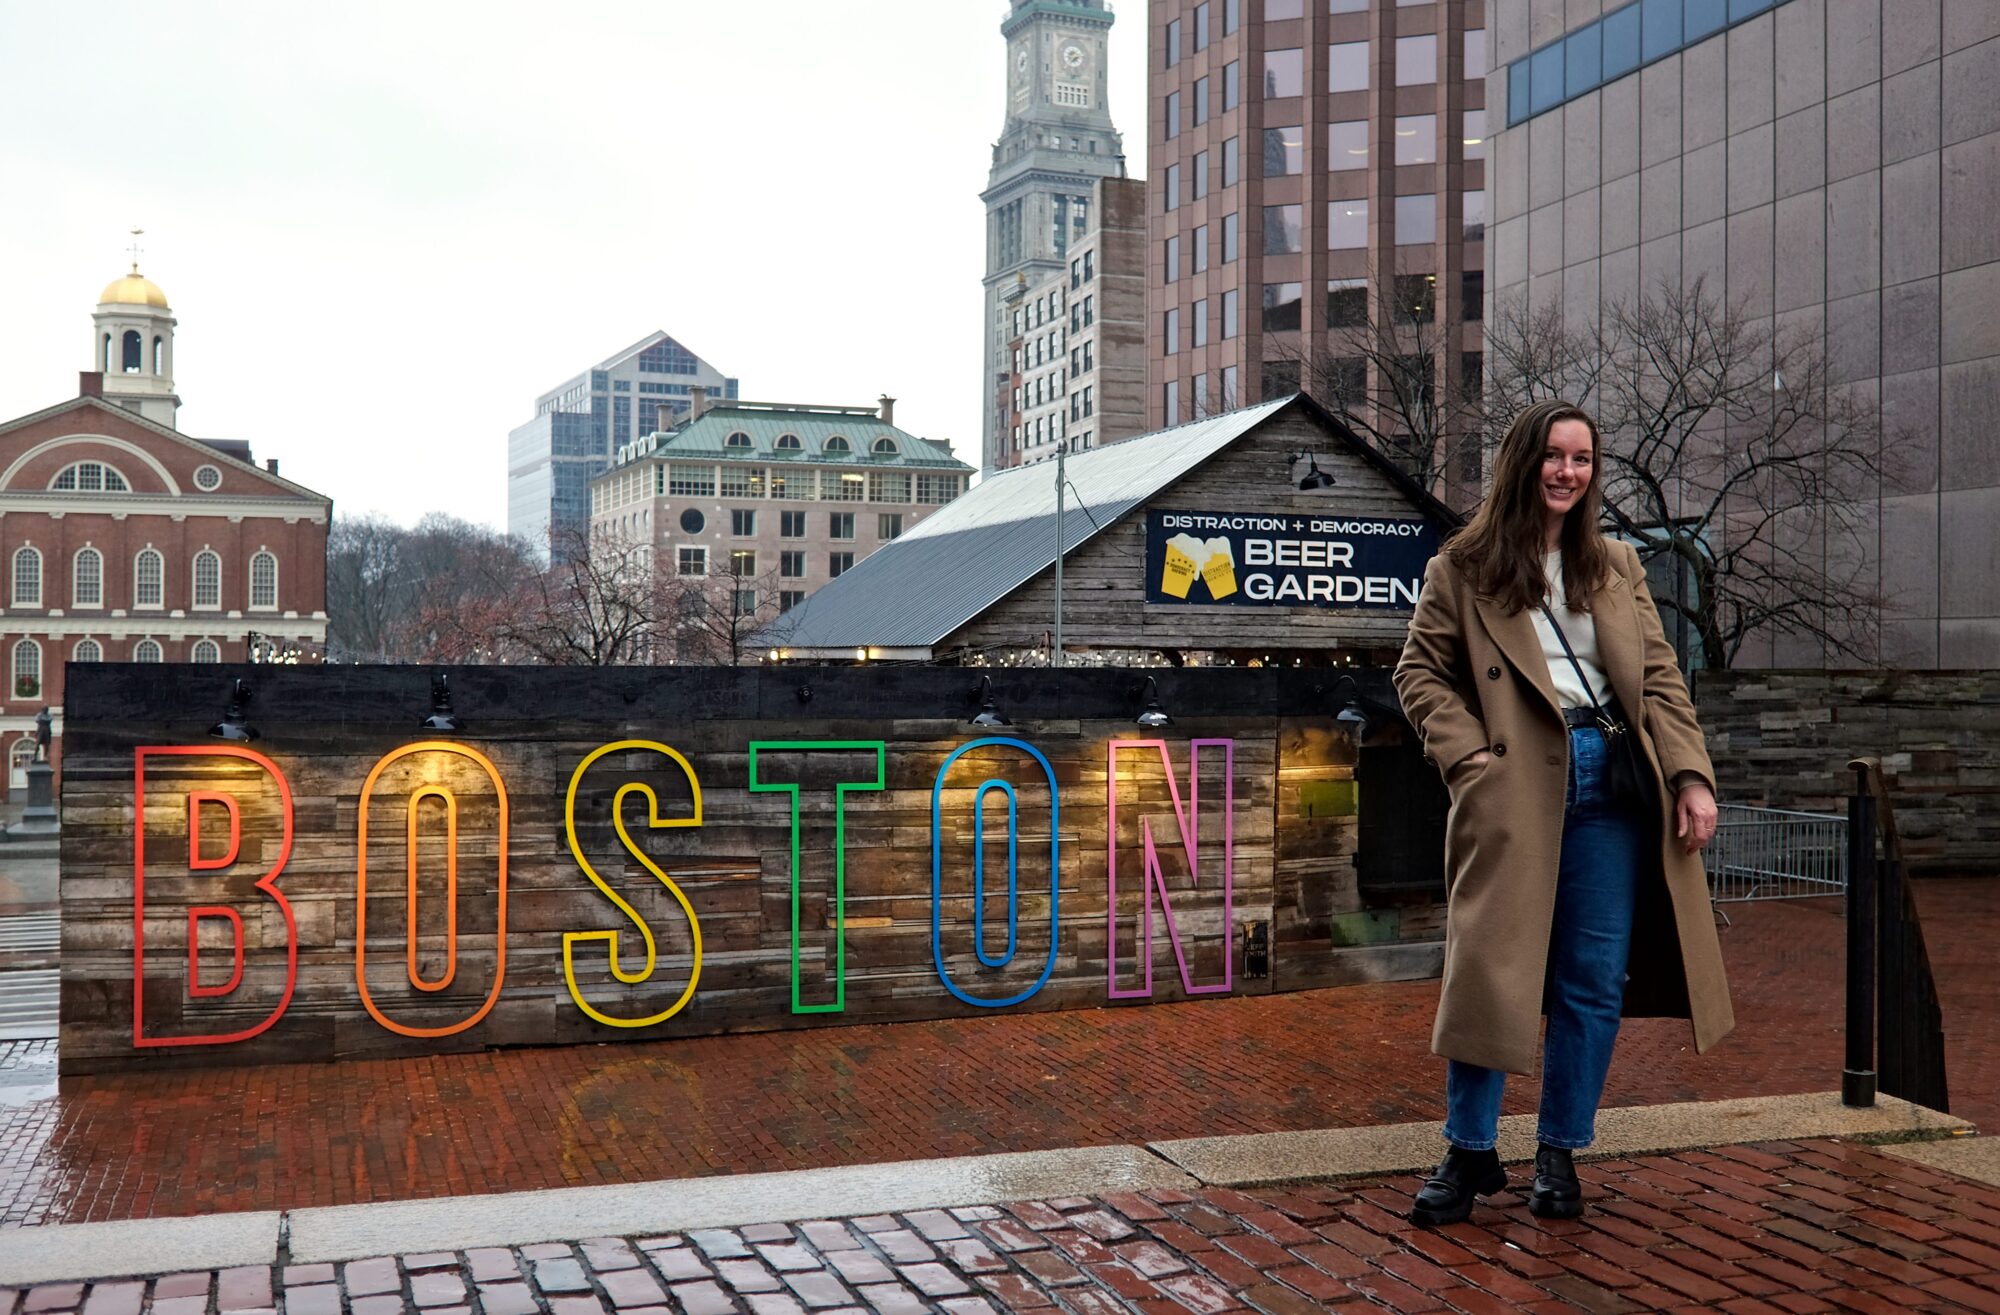 Alyssa stands in front of a BOSTON sign